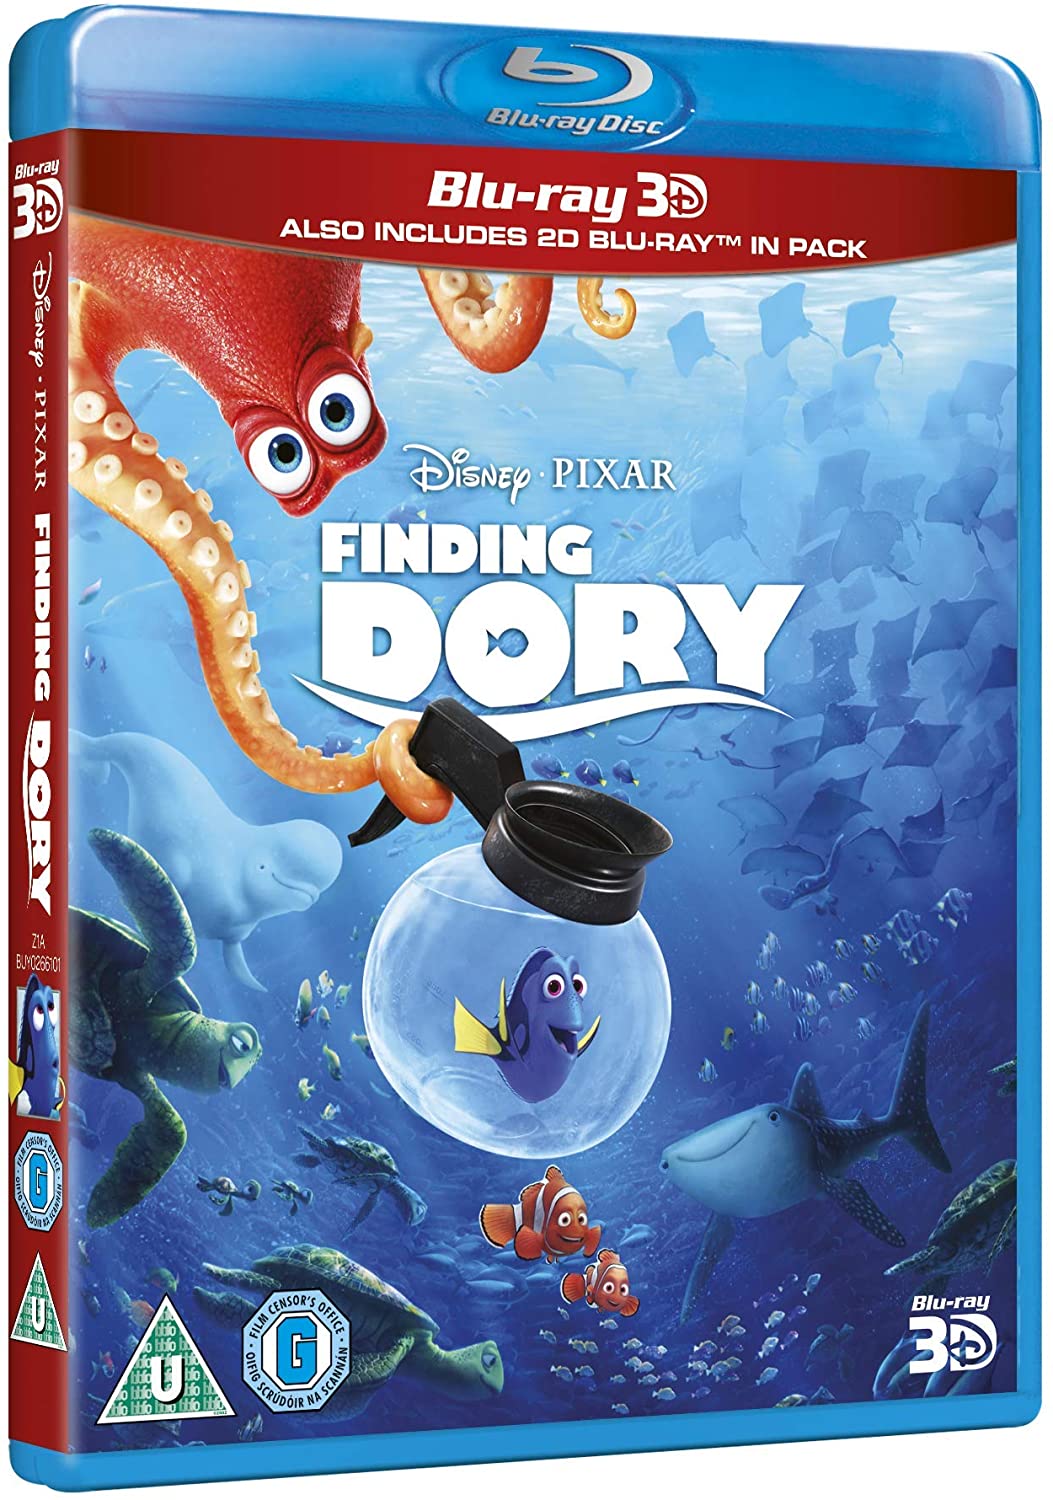 Trouver Dory [Blu-ray 3D] [2017]